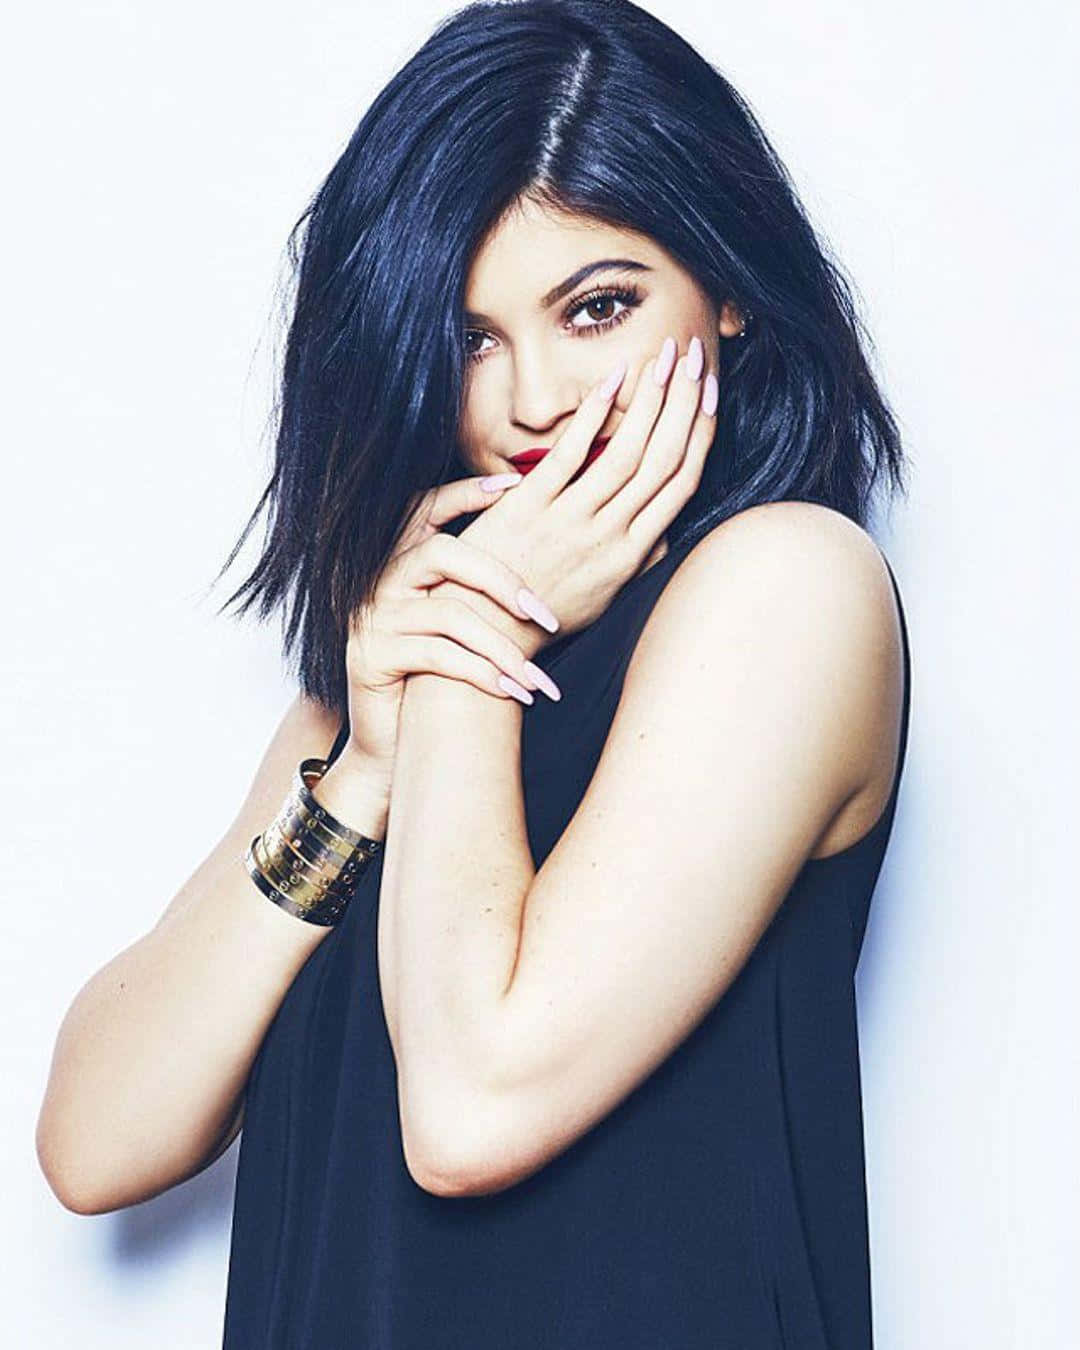 Kylie Jenner Radiating Confidence in Chic Outfit